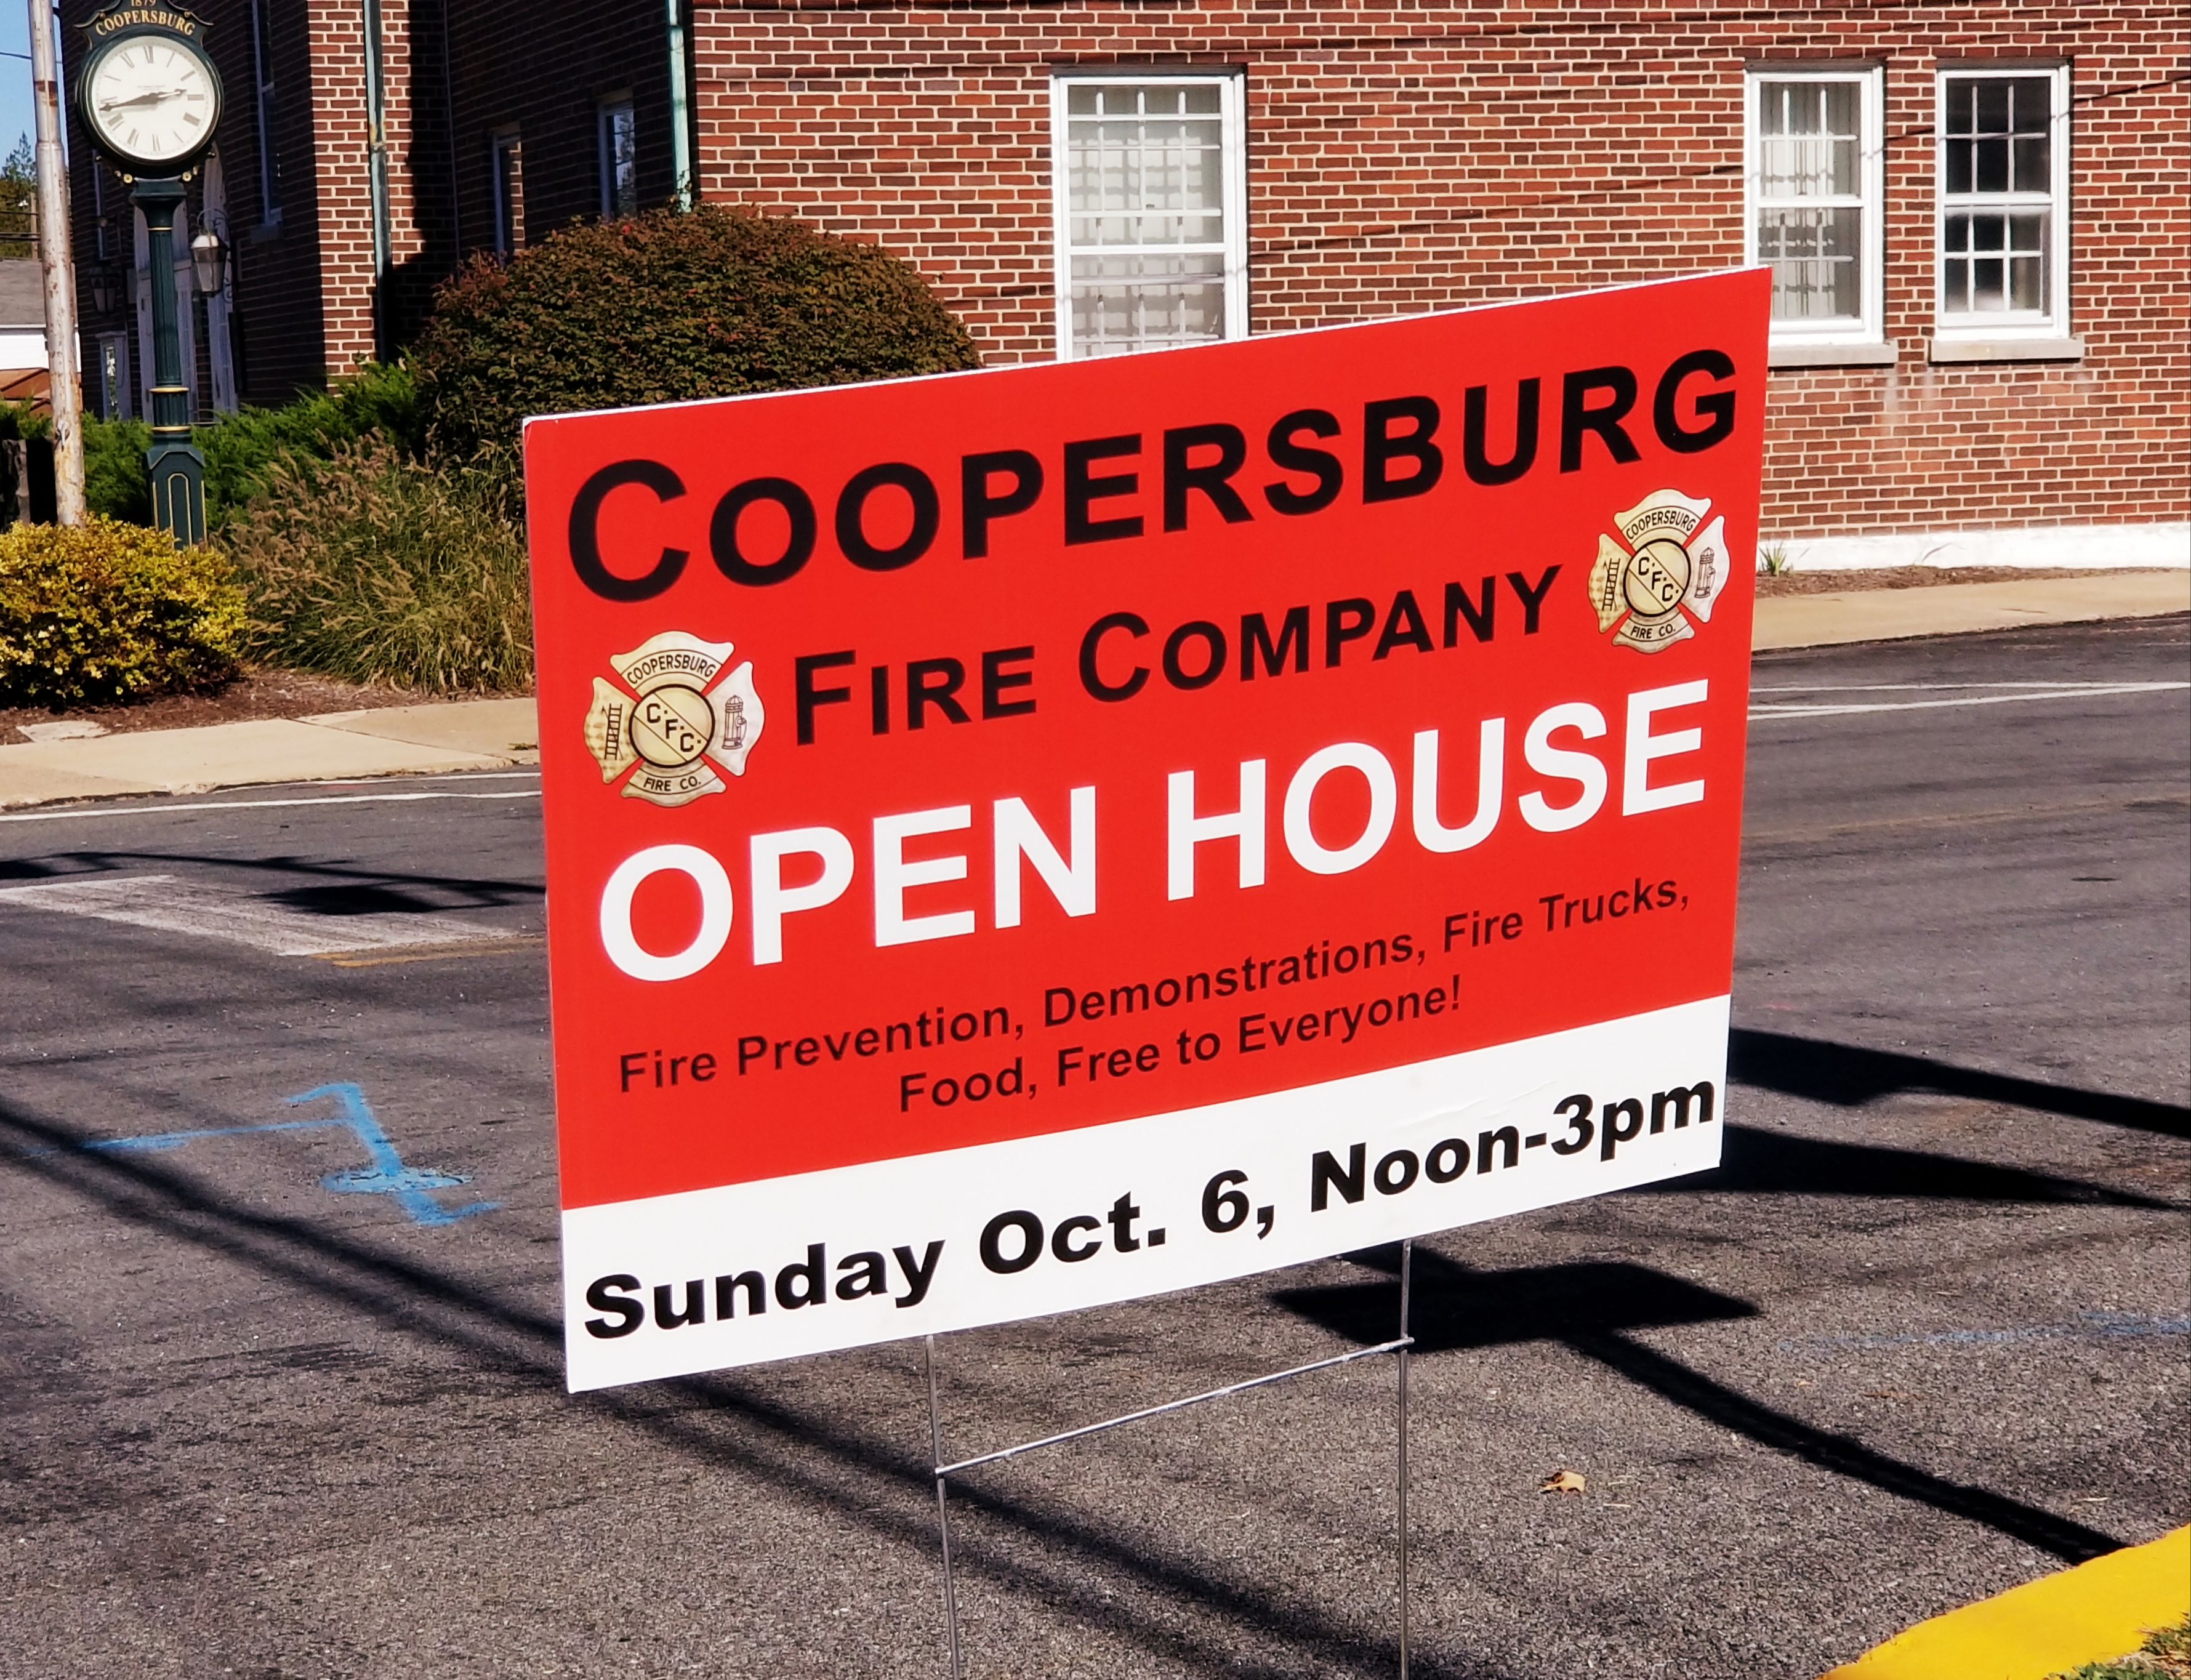 Coopersburg Fire Company